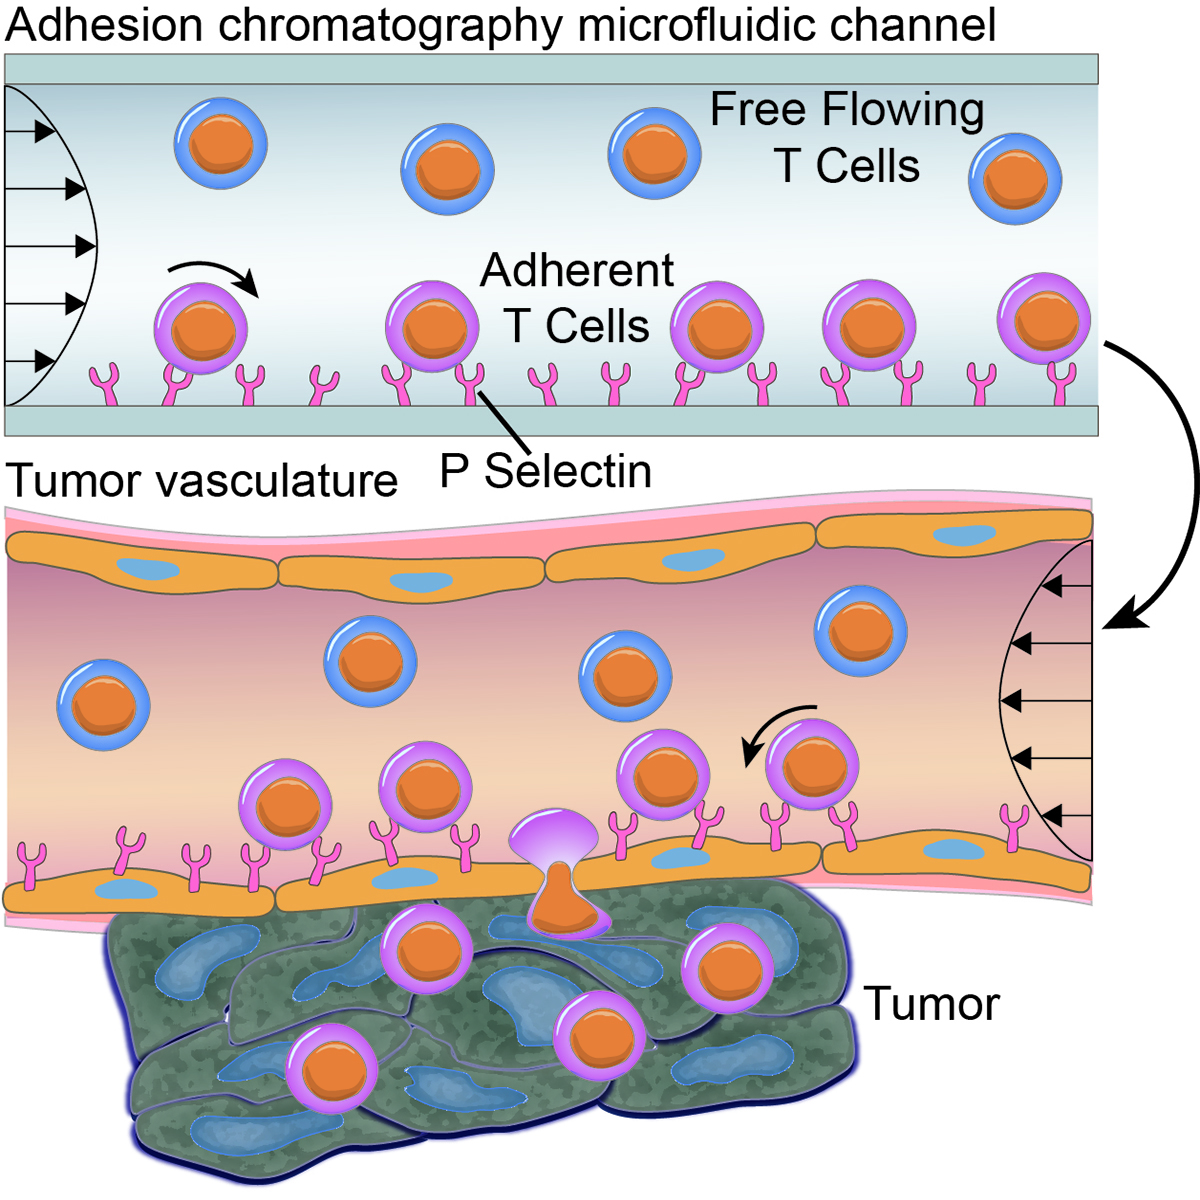 Adhesion chromatography microfluidic channel shows adherent T cells rotating beneath the free-flowing T cells through the P Selectin to the tumor vasculature.